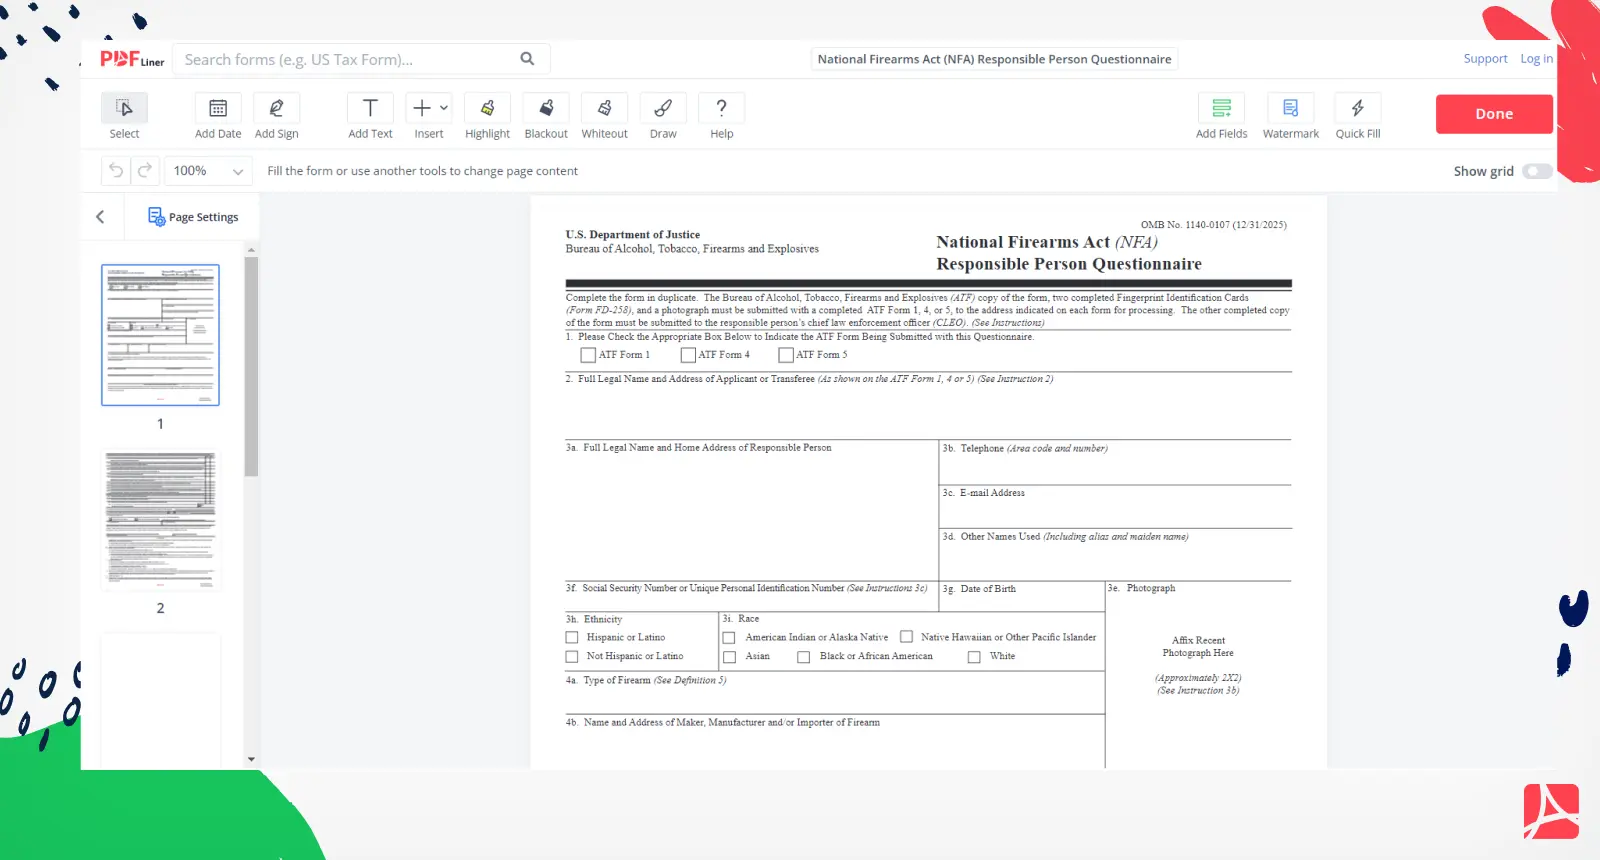 National Firearms Act (NFA) Responsible Person Questionnaire Form Screenshot